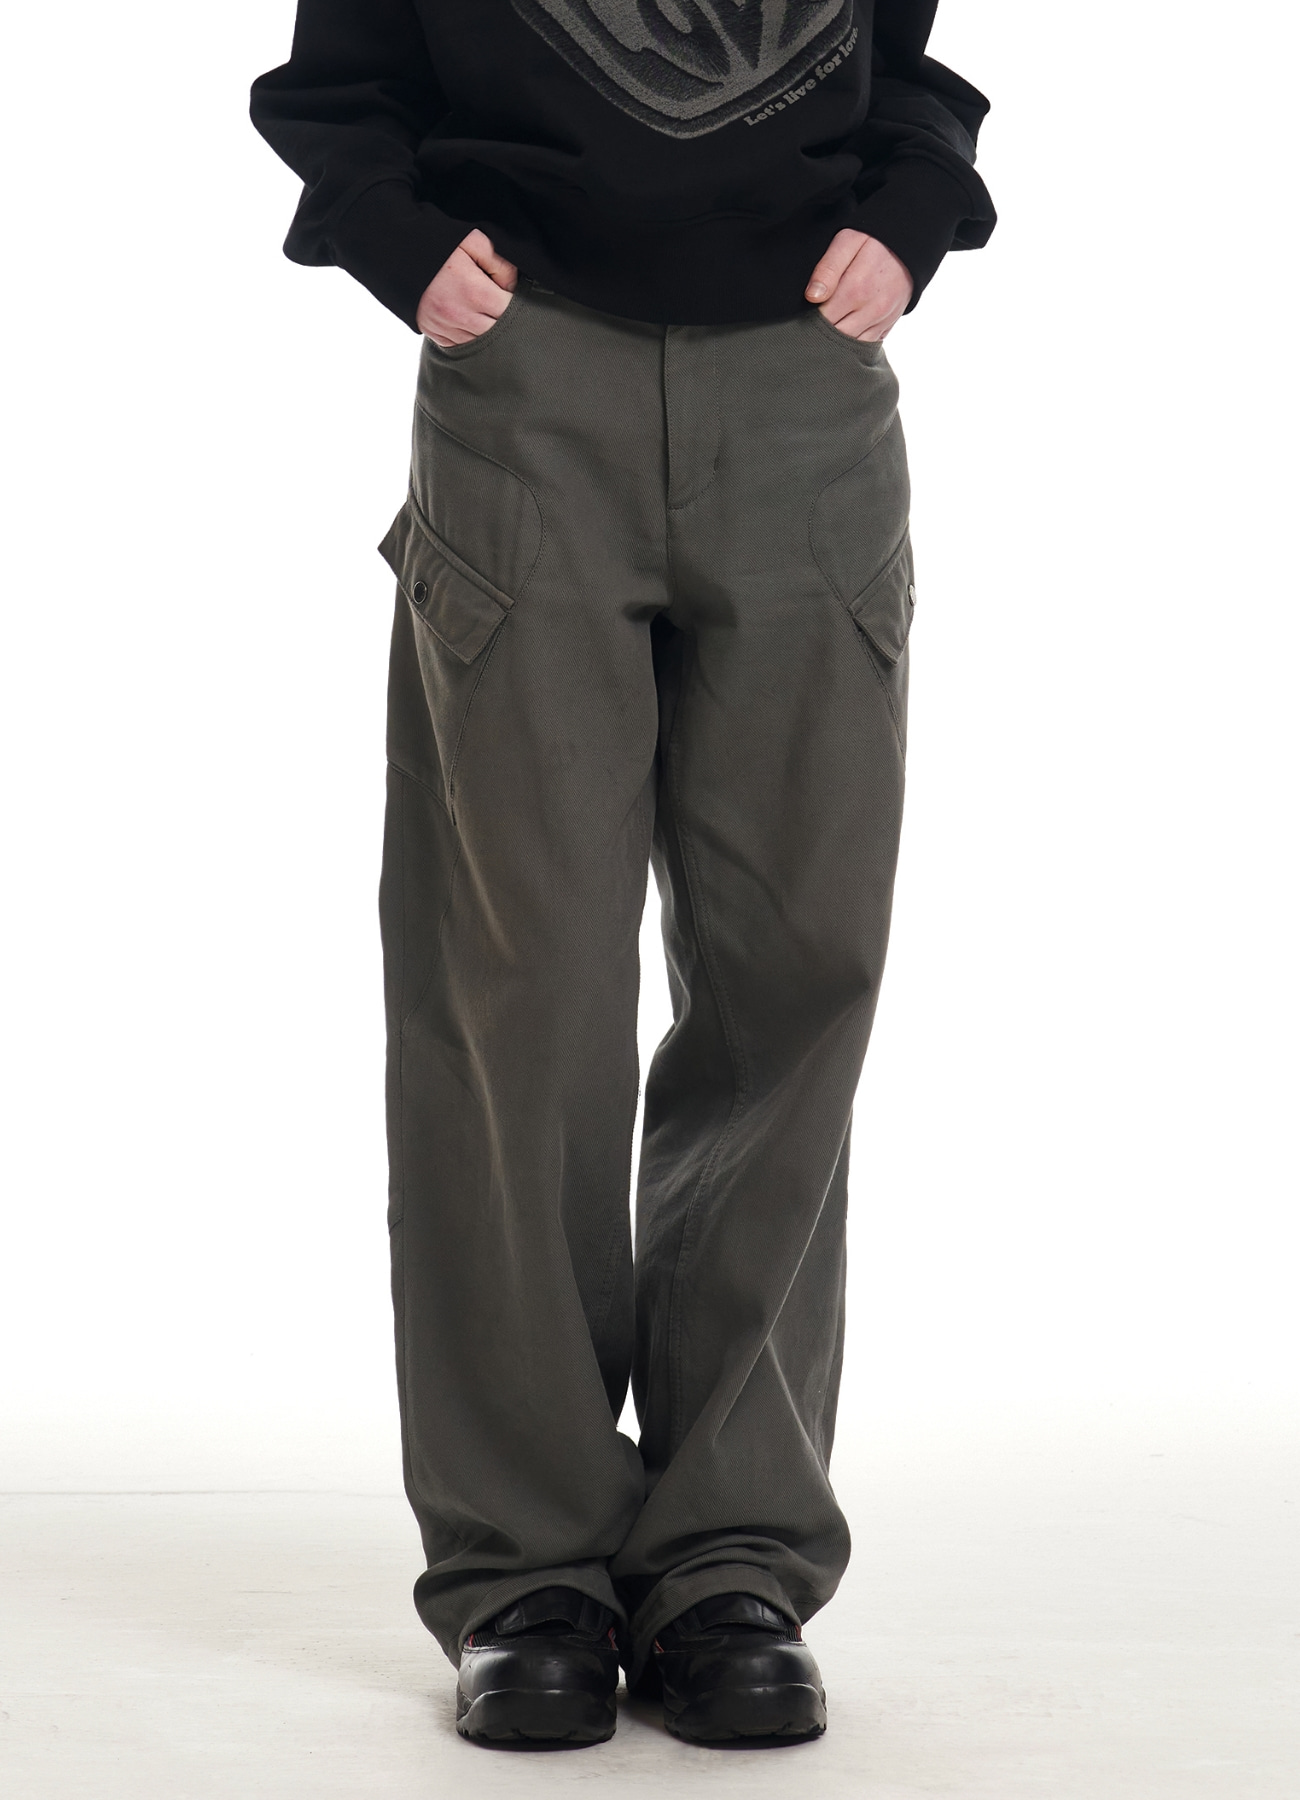 ACCRA TWILL CARGO PANTS CHARCOAL